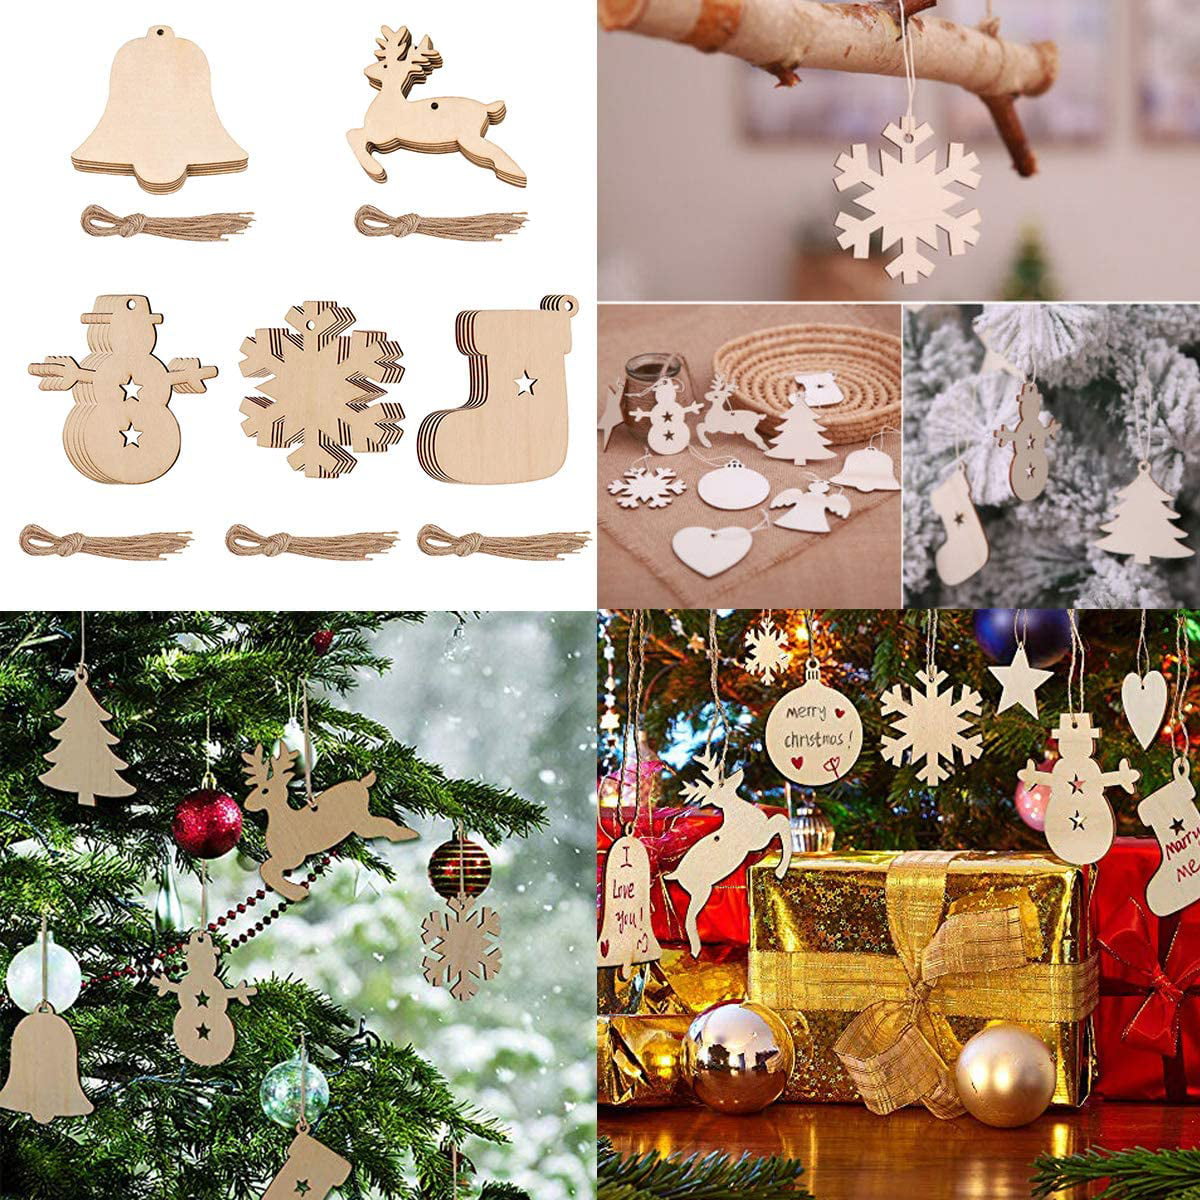 Elk Comes with Natural Twine for Christmas Tree Decoration DIY Crafts Snowman Small Bell Wooden Christmas Ornaments Christmas Stockings 50Pcs Unfinished Wooden Ornaments Snowflakes